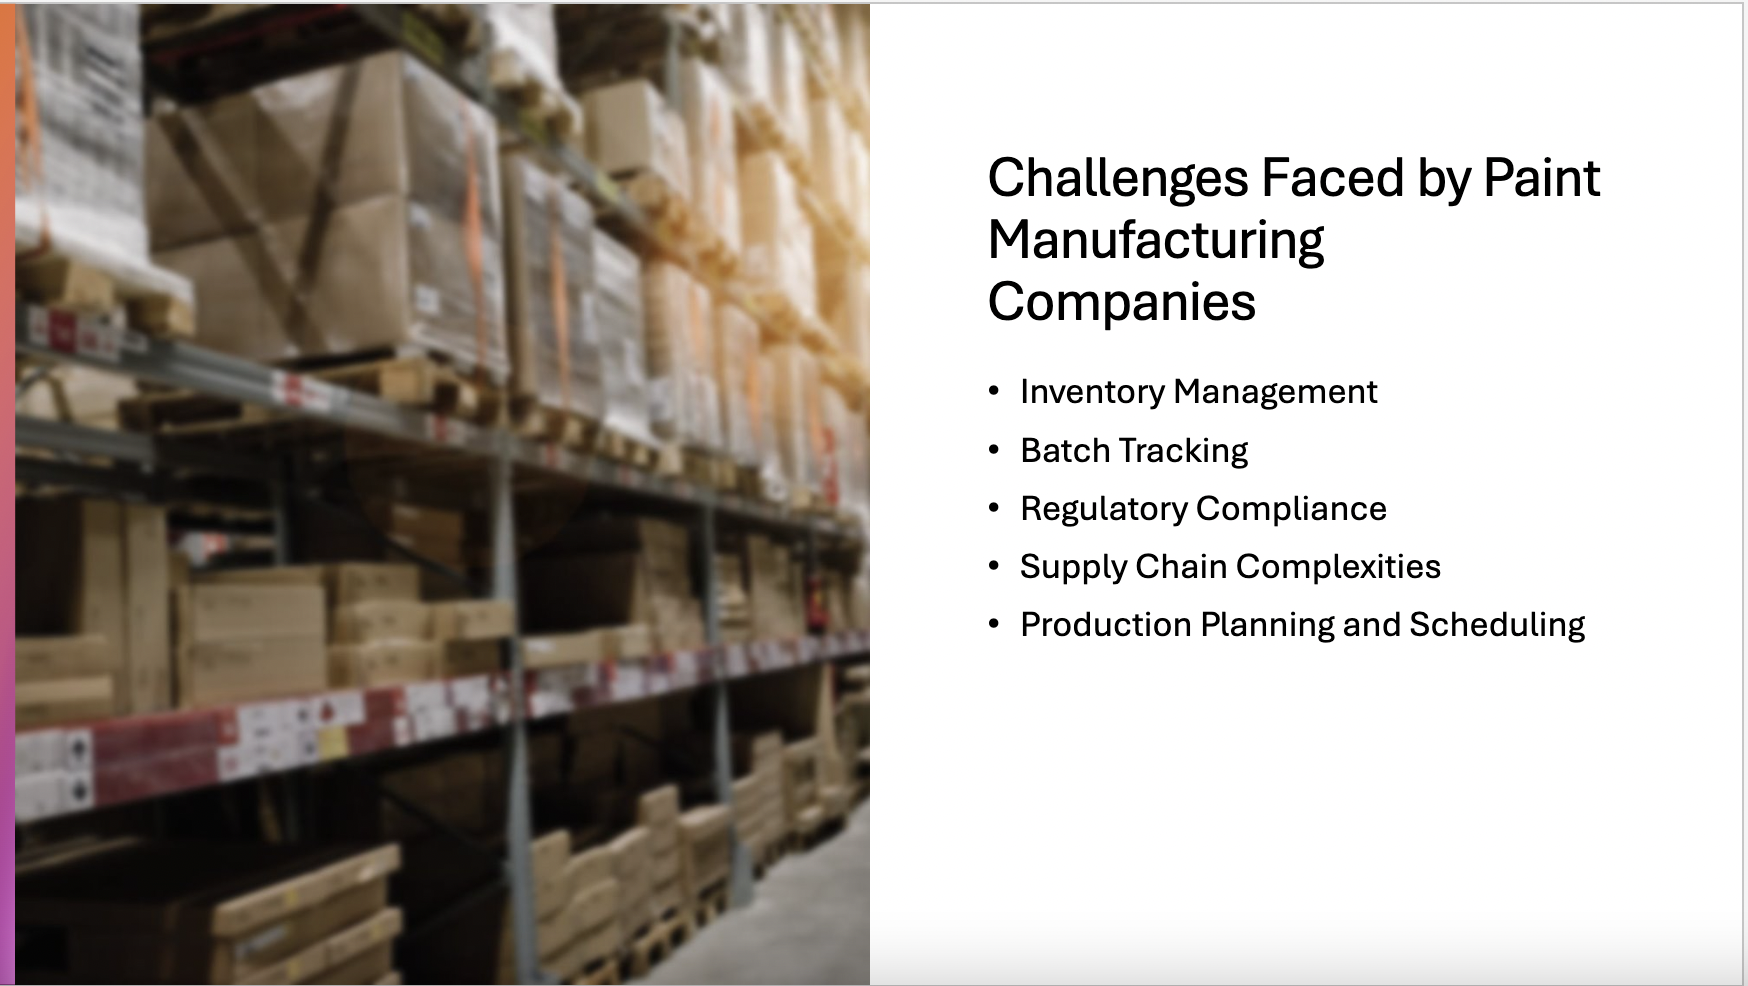 Challenges Faced by Paint Manufacturing Companies